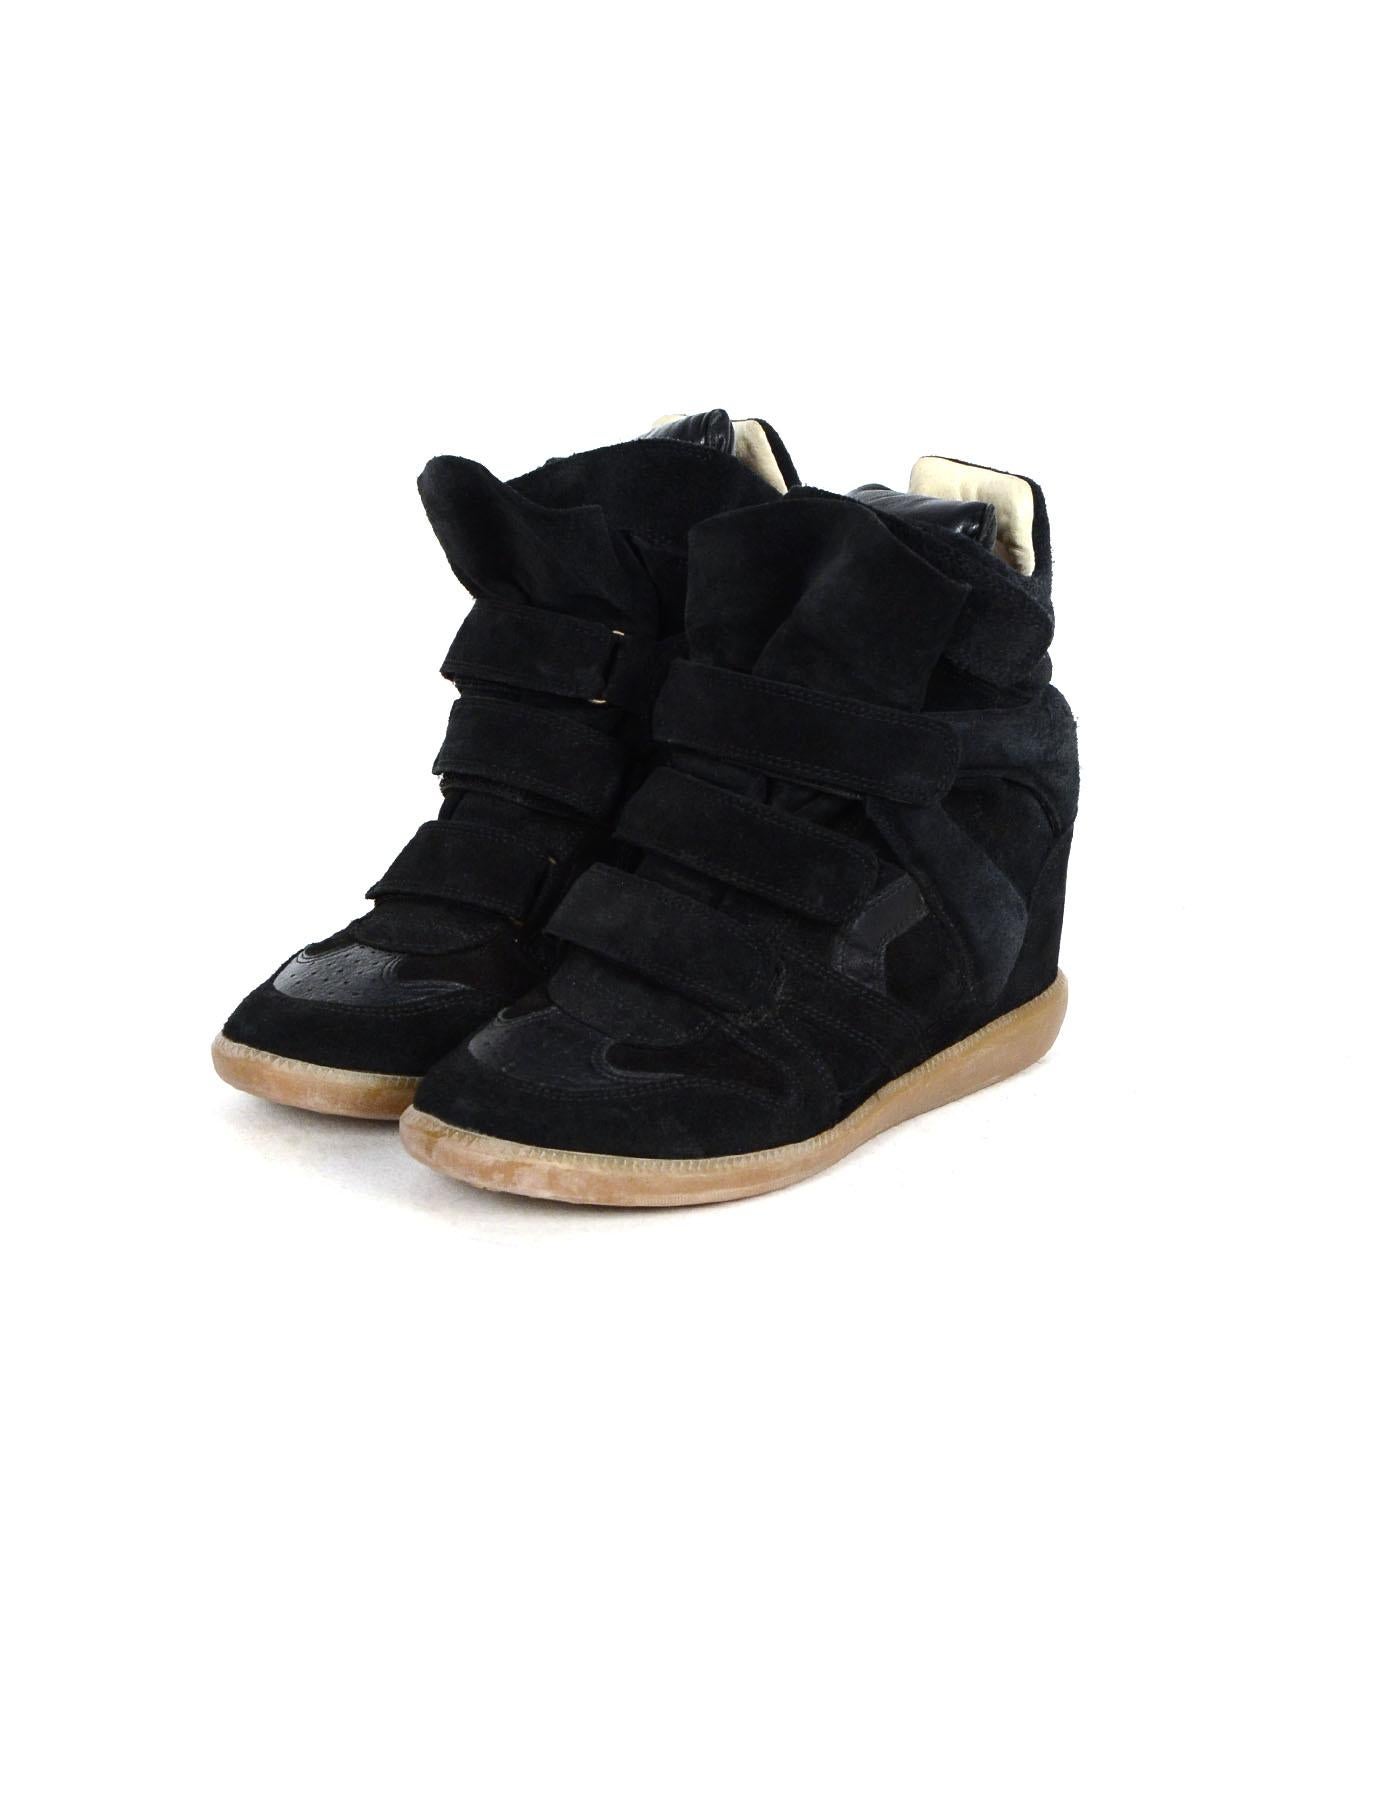 Isabel Marant Black Suede Bekett Wedge Sneakers sz 41

Made In: Portugal
Color: Black with gum rubber sole
Materials: Suede, leather, rubber
Closure/Opening: Velcro
Overall Condition: Excellent pre-owned condition.  Light wear to suede throughout. 